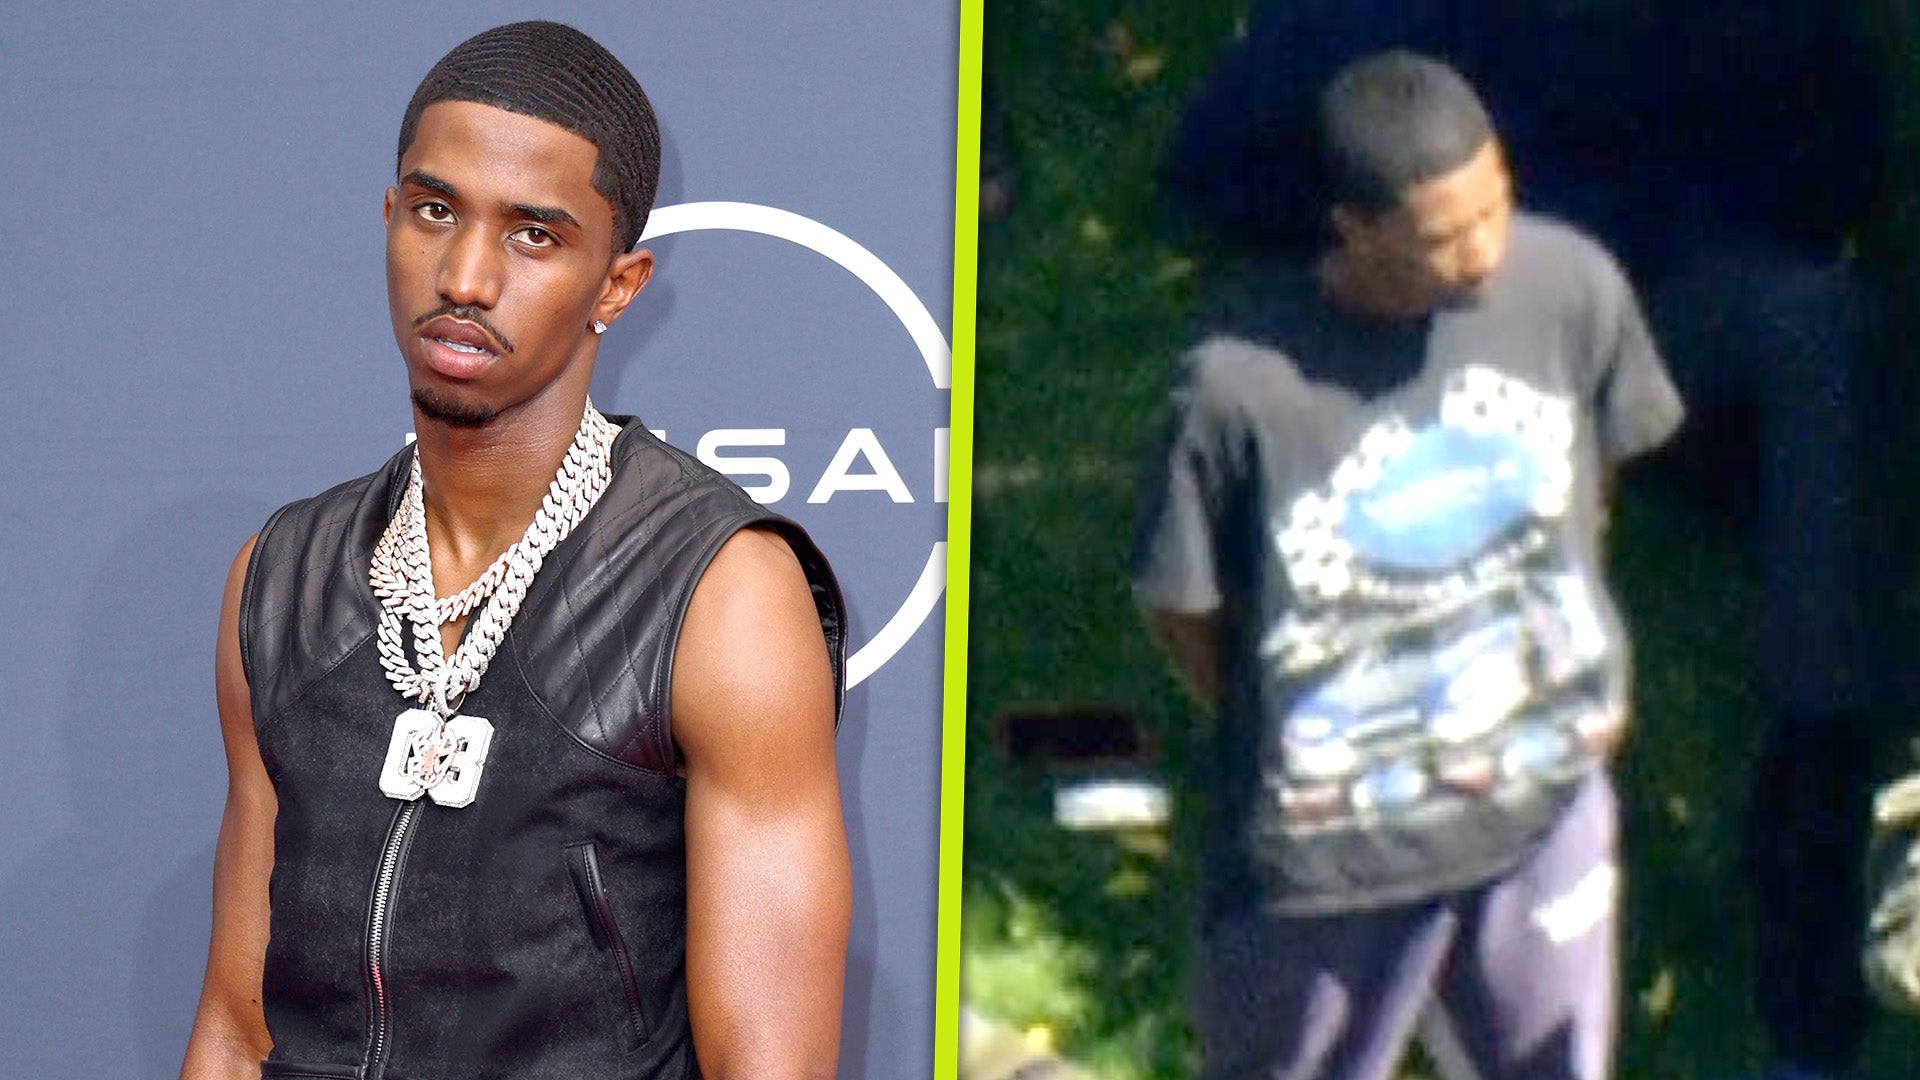 Diddy’s Son Christian Combs Speaks Out After Being Handcuffed During Home Raid